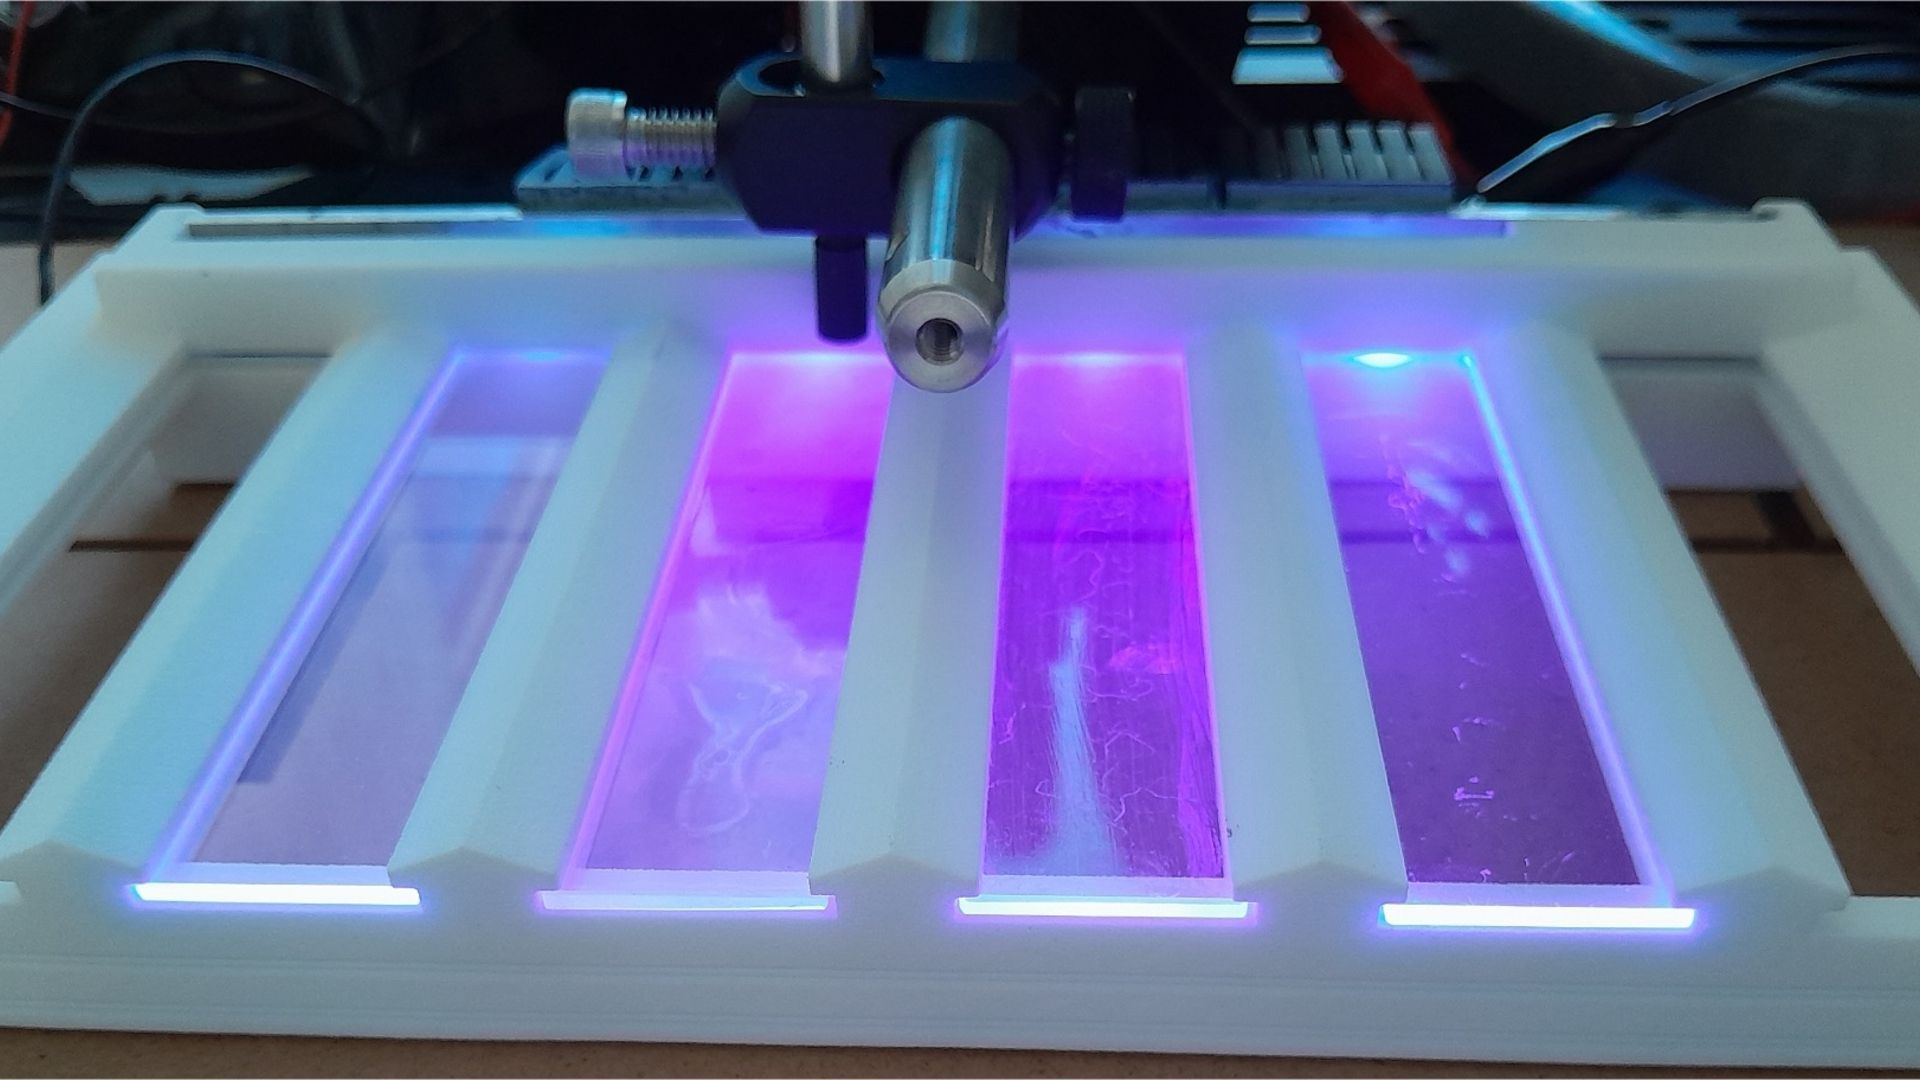 Researchers make a special glass that cleans biofilm with light [Video]